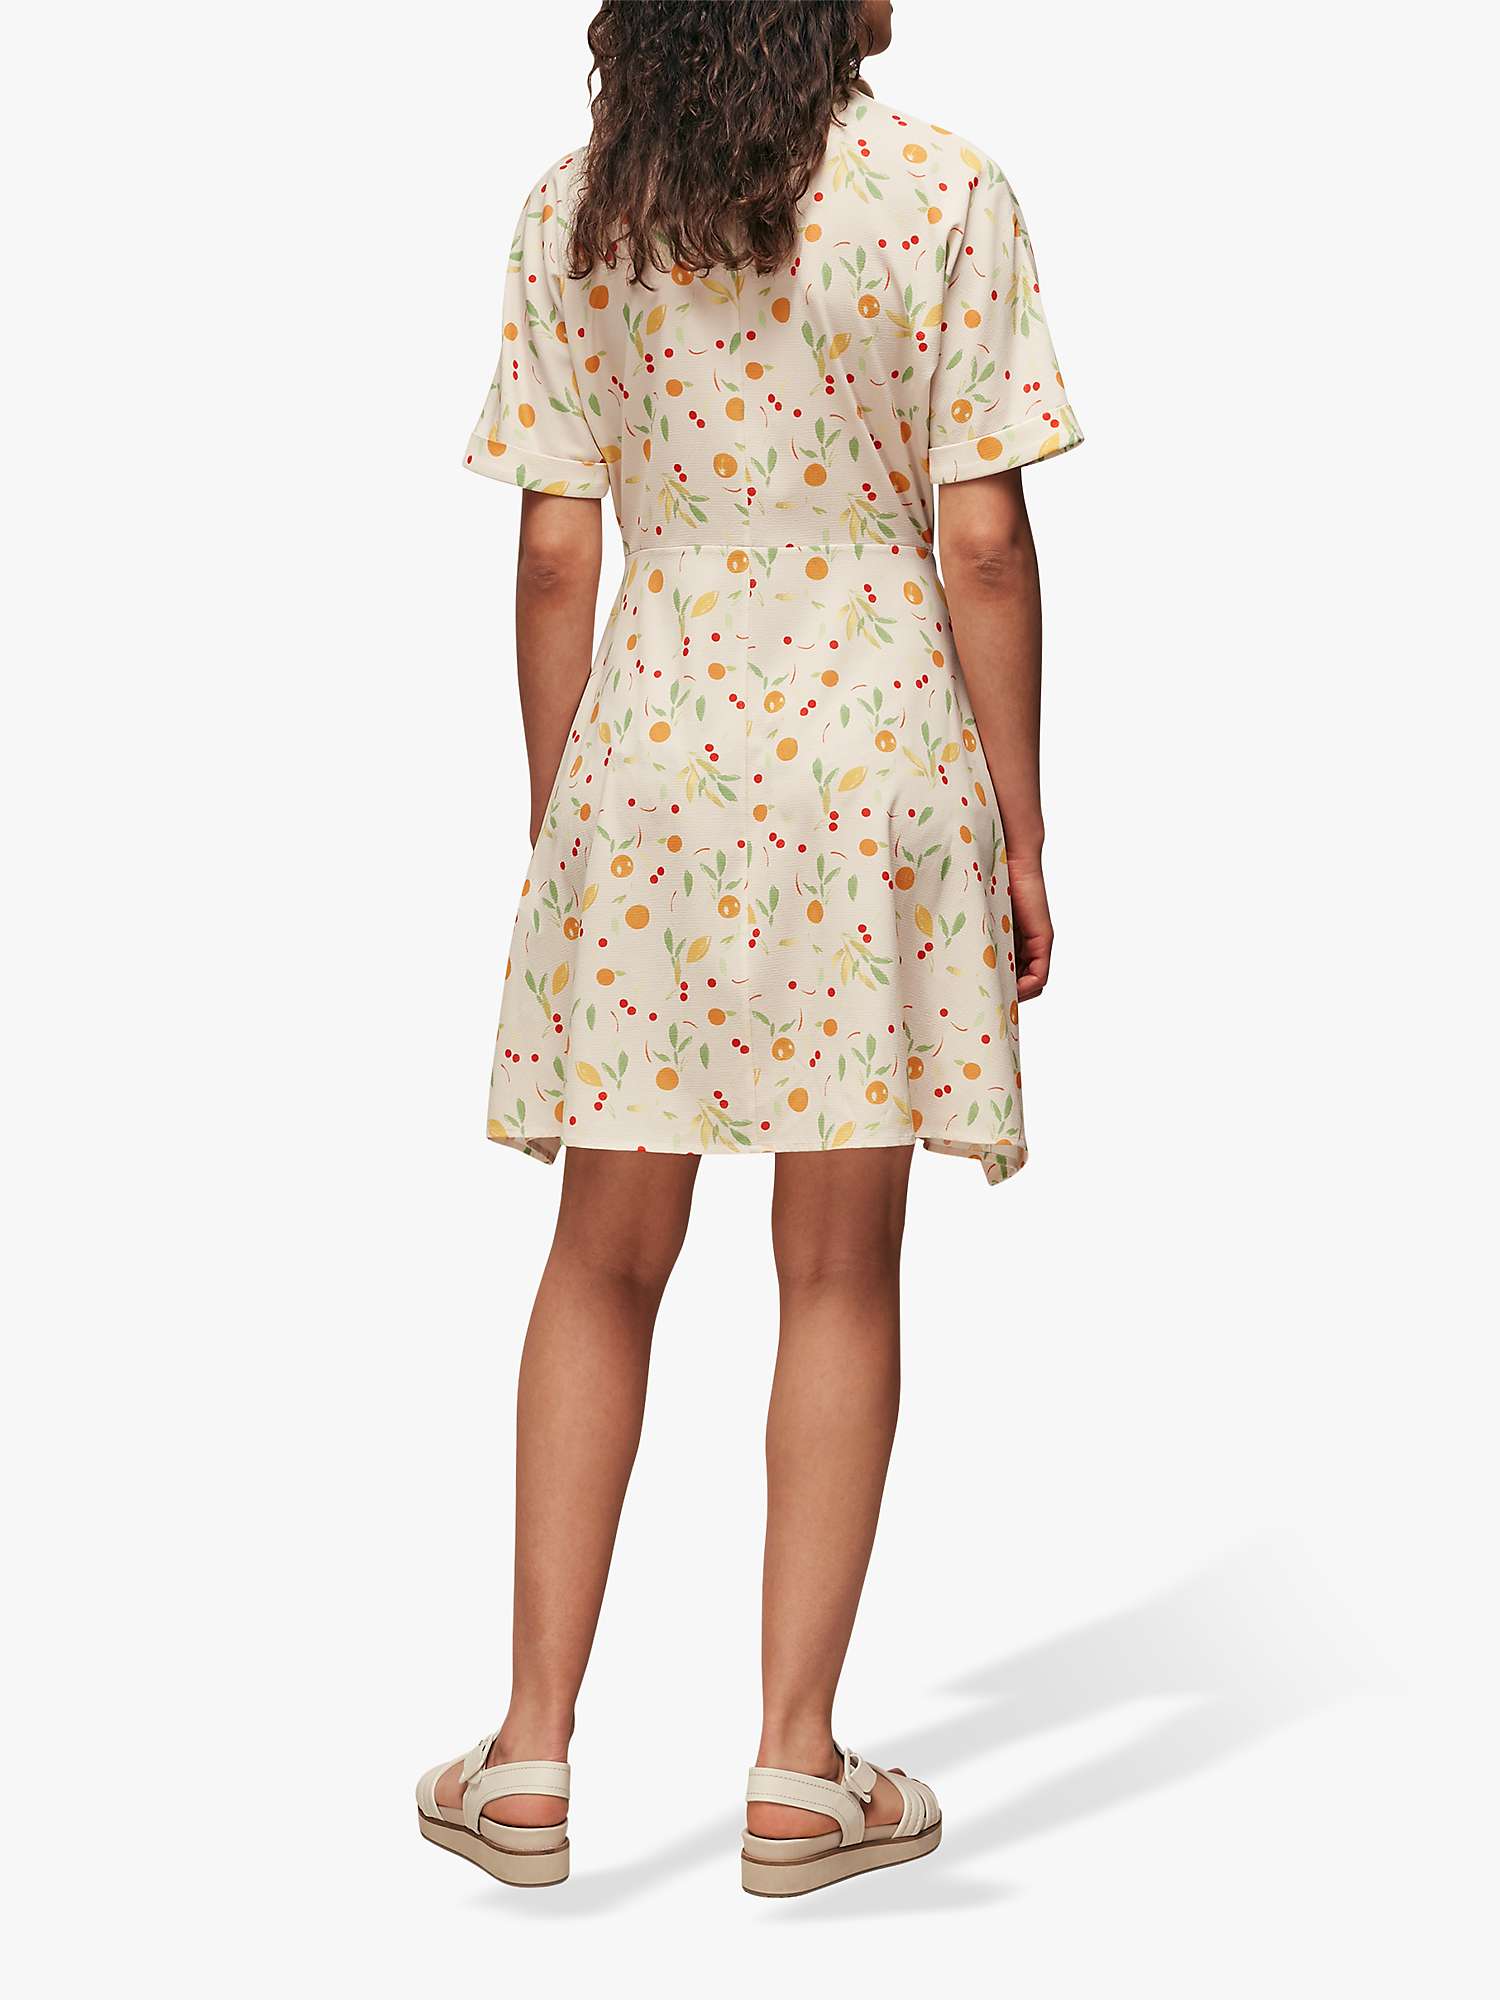 Buy Whistles Dolly Fruit Tie Front Dress, Cream/Multi Online at johnlewis.com